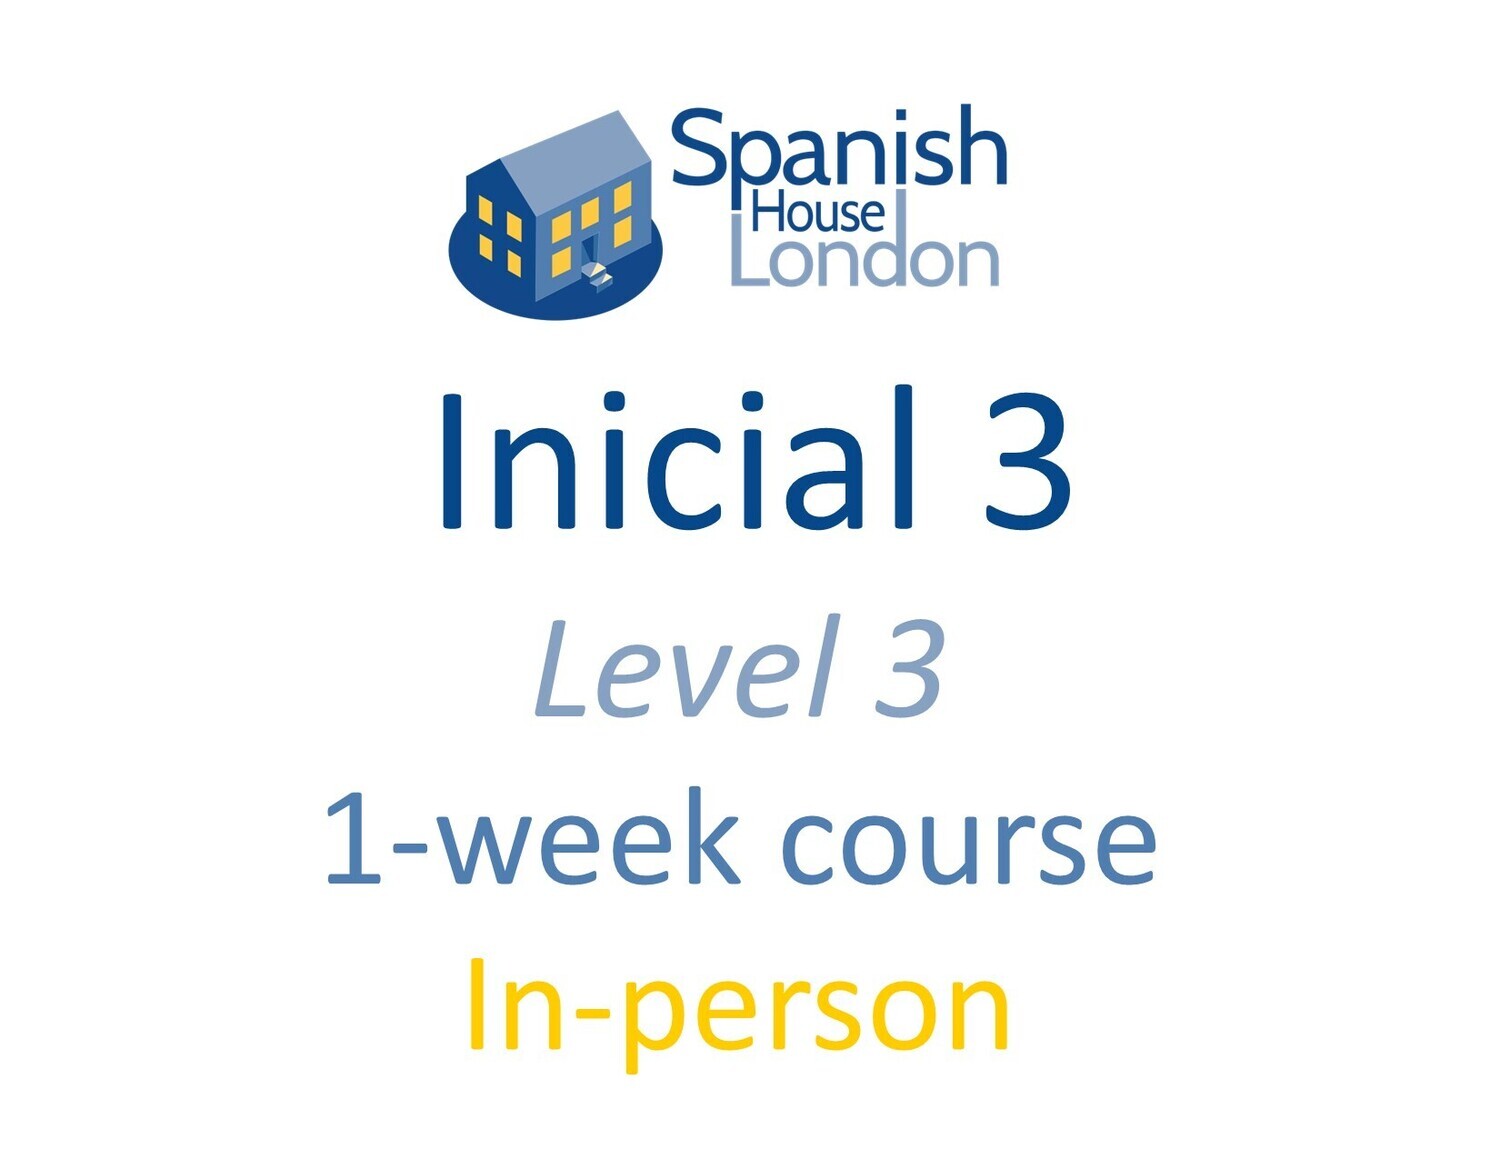 One-Week Intensive Inicial 3 Course starting on 27th March at 10.30am in Clapham North